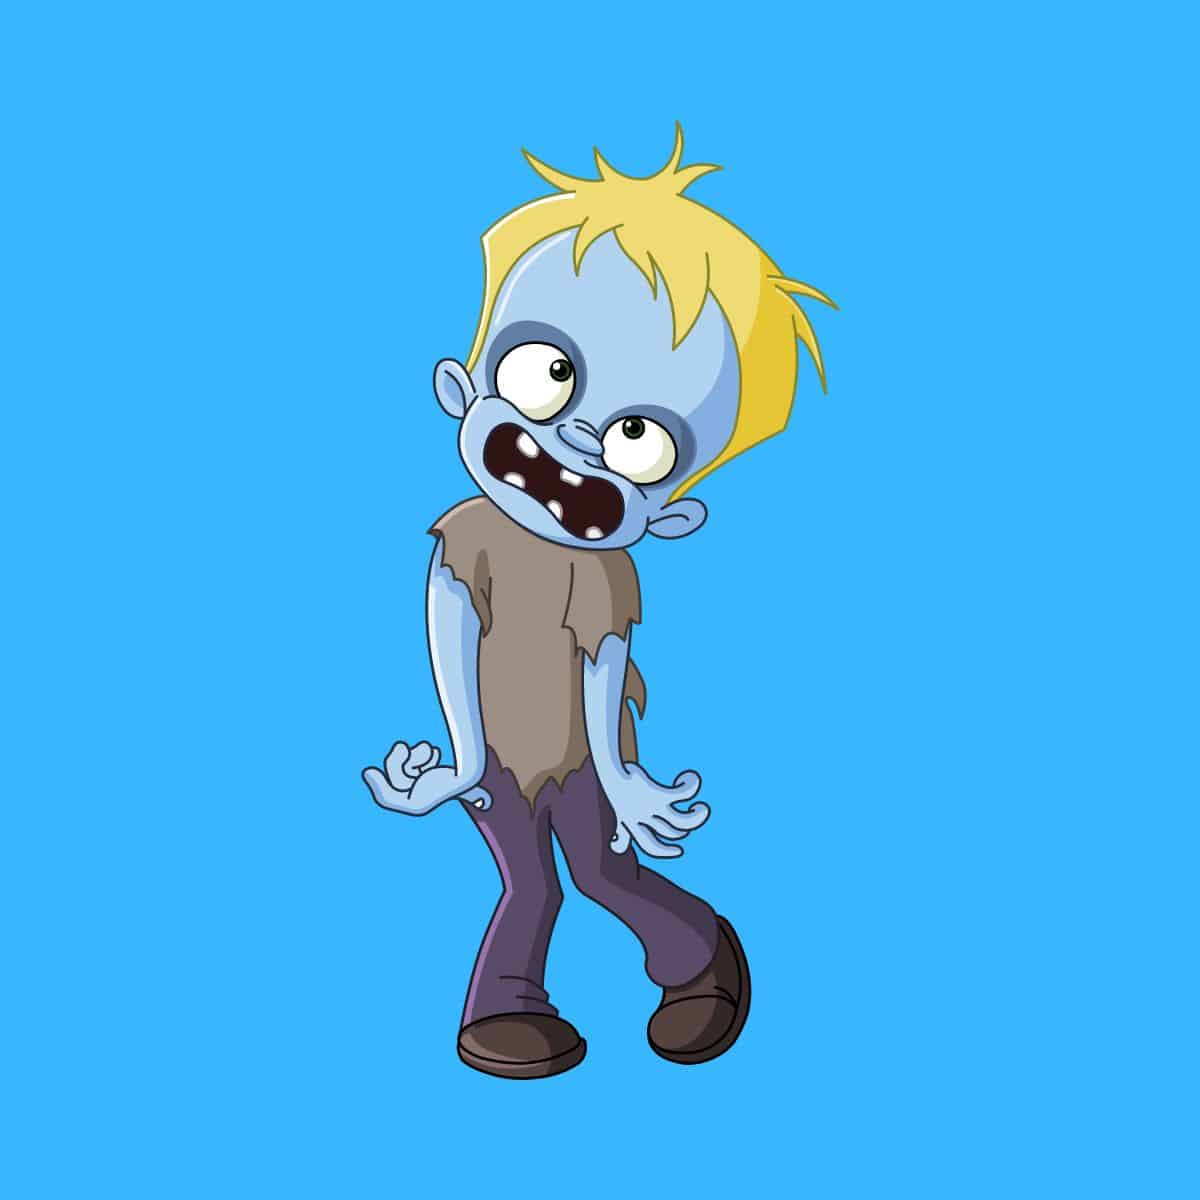 Cartoon graphic of a young blue zombie with blonde hair on a blue background.